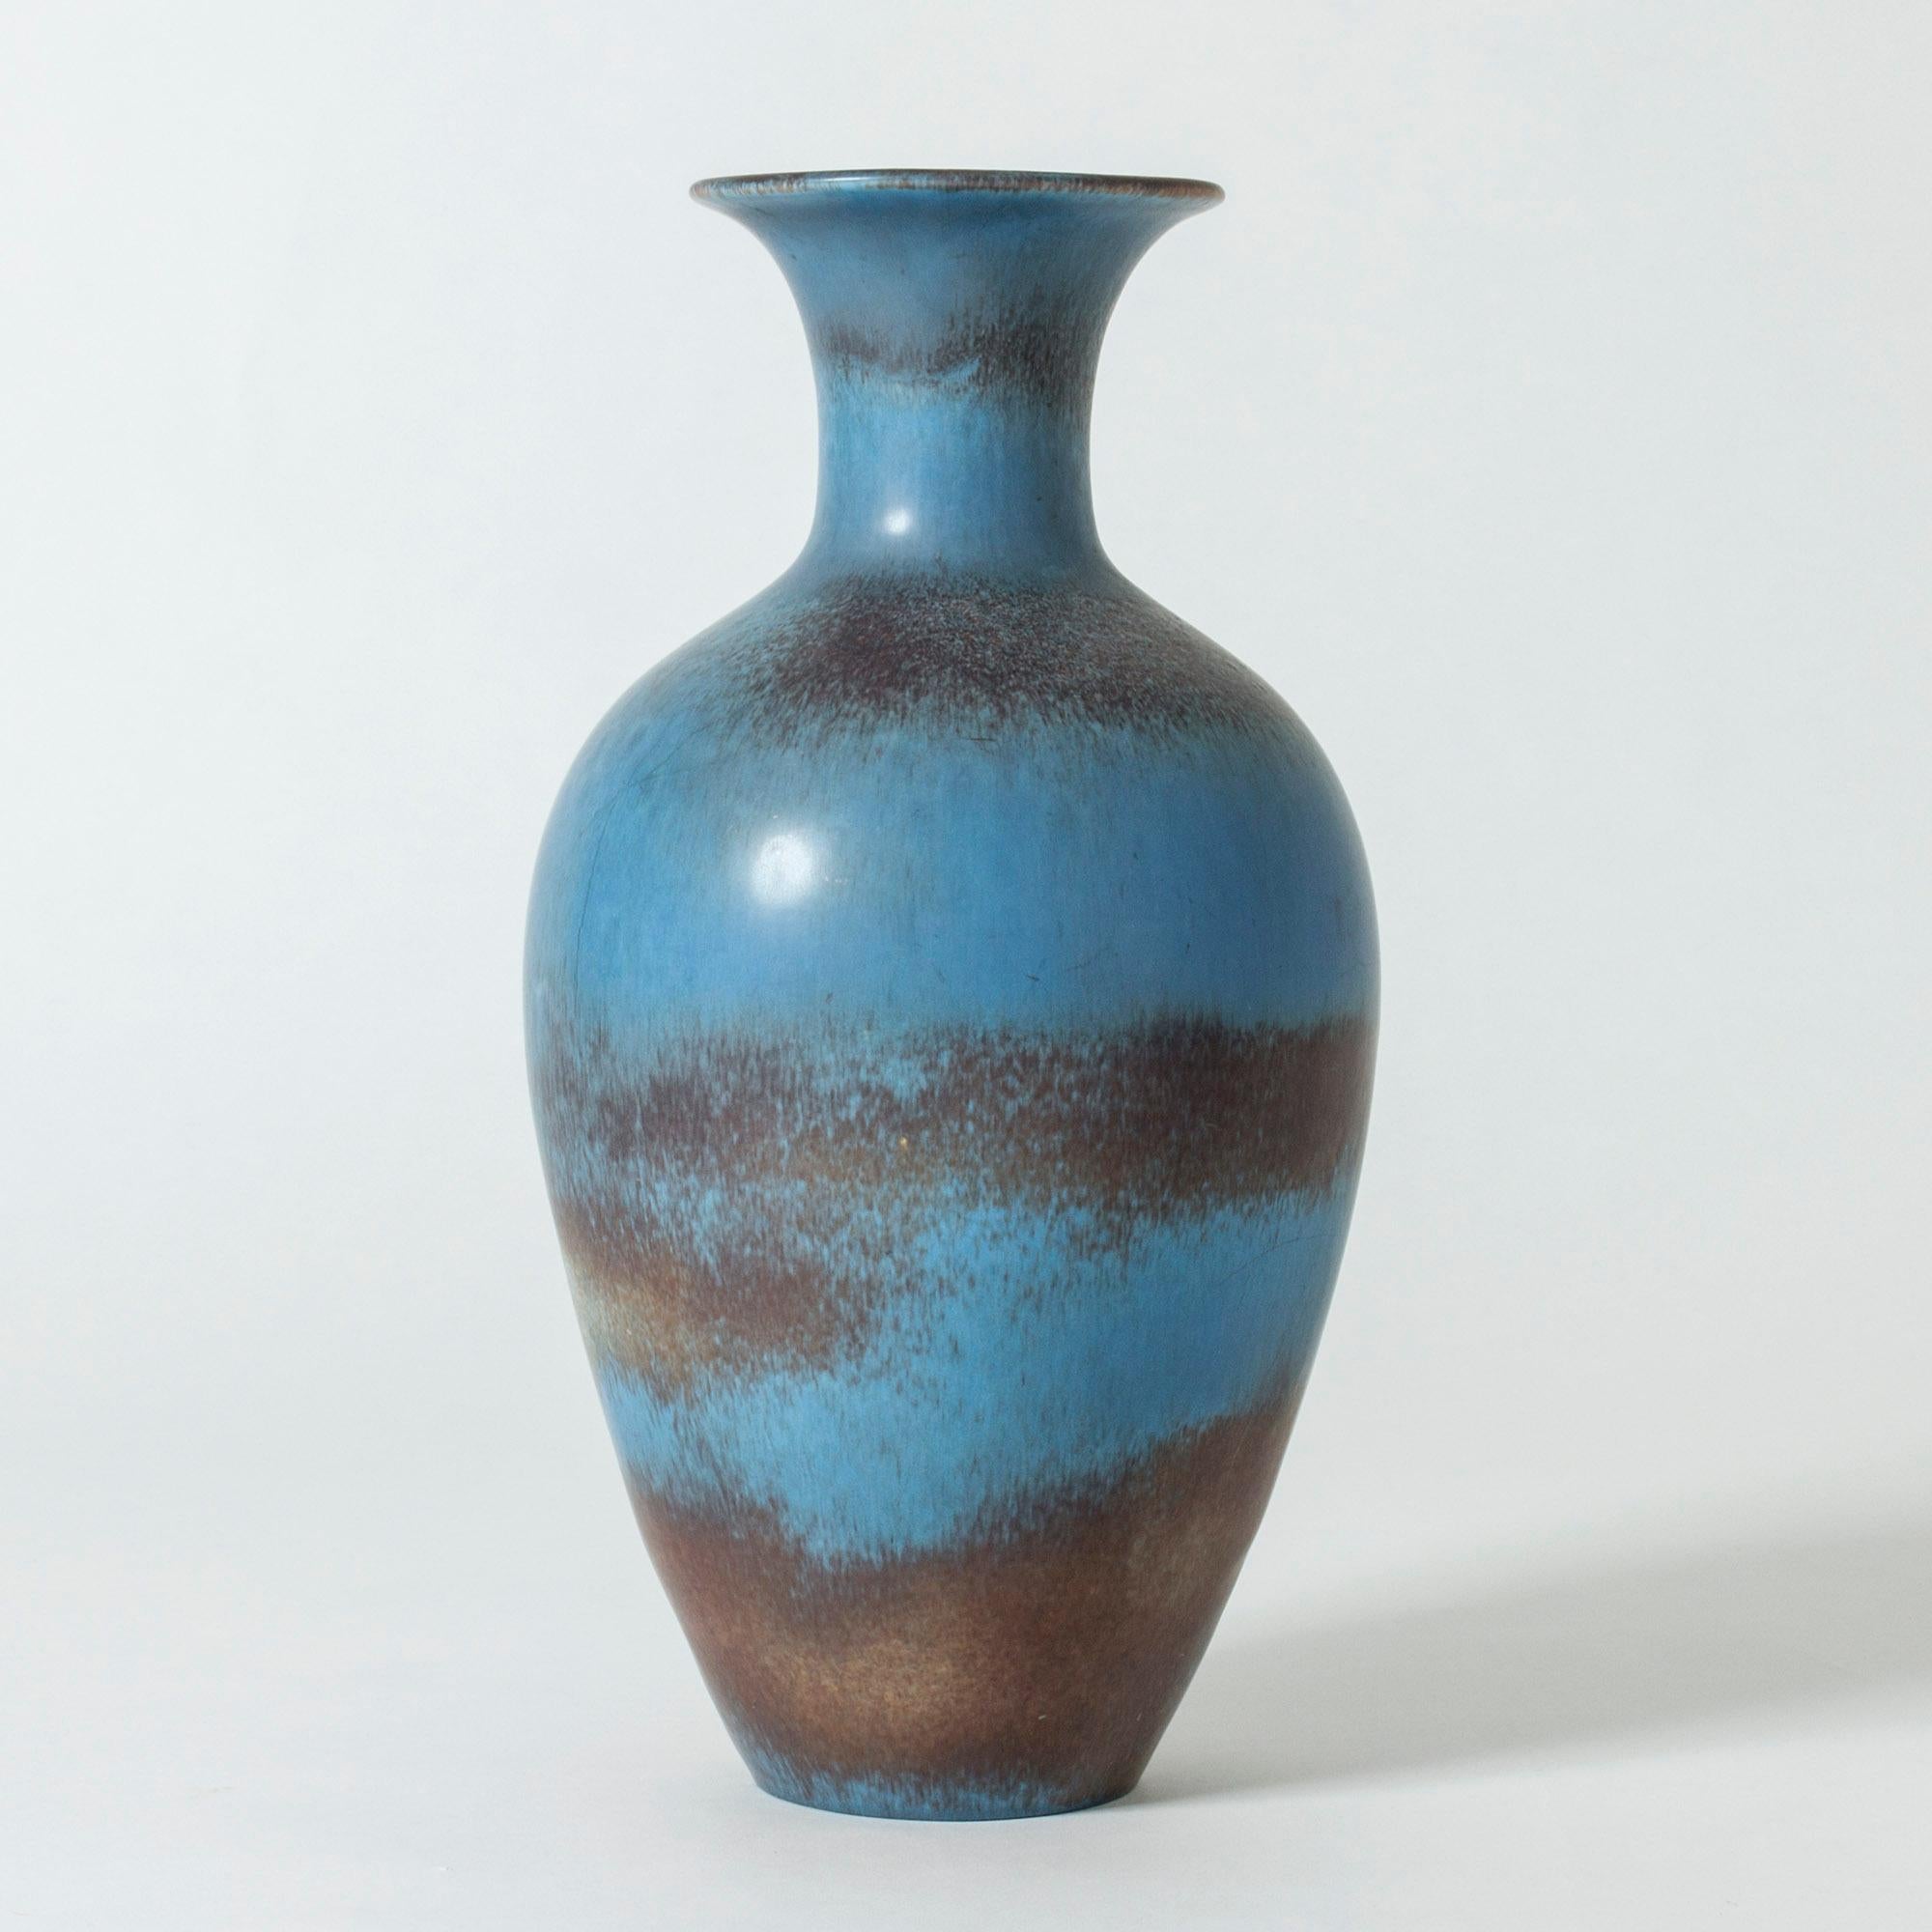 Large stoneware floor vase by Gunnar Nylund in a classic shape. Beautiful, vibrant blue glaze blending into brown and purple.